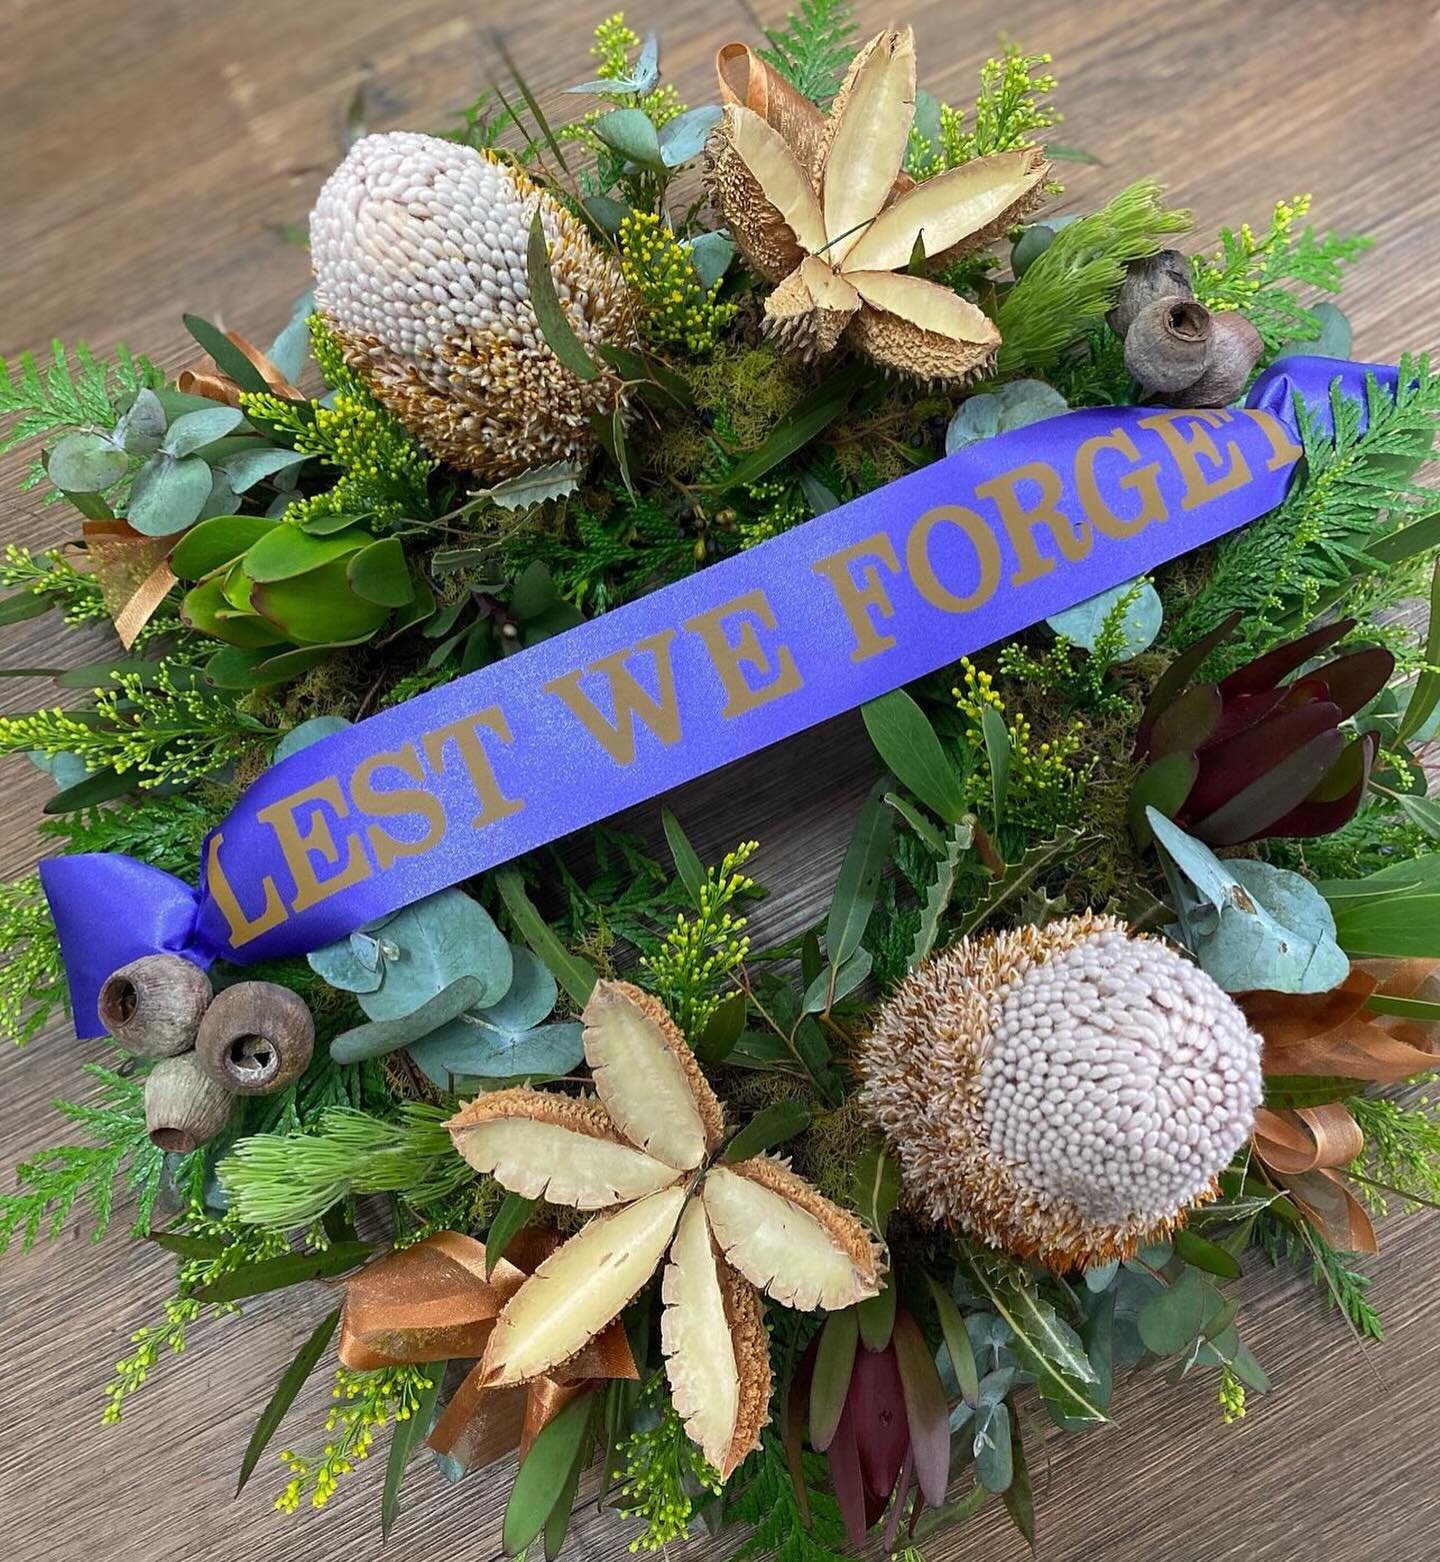 Honour the heroes who sacrificed their lives for our country this Anzac Day, with timeless wreaths of commemoration from Gatton Florist and Gifts. As you prepare to attend your local Anzac Day march, let us help you pay tribute to our soldiers with b